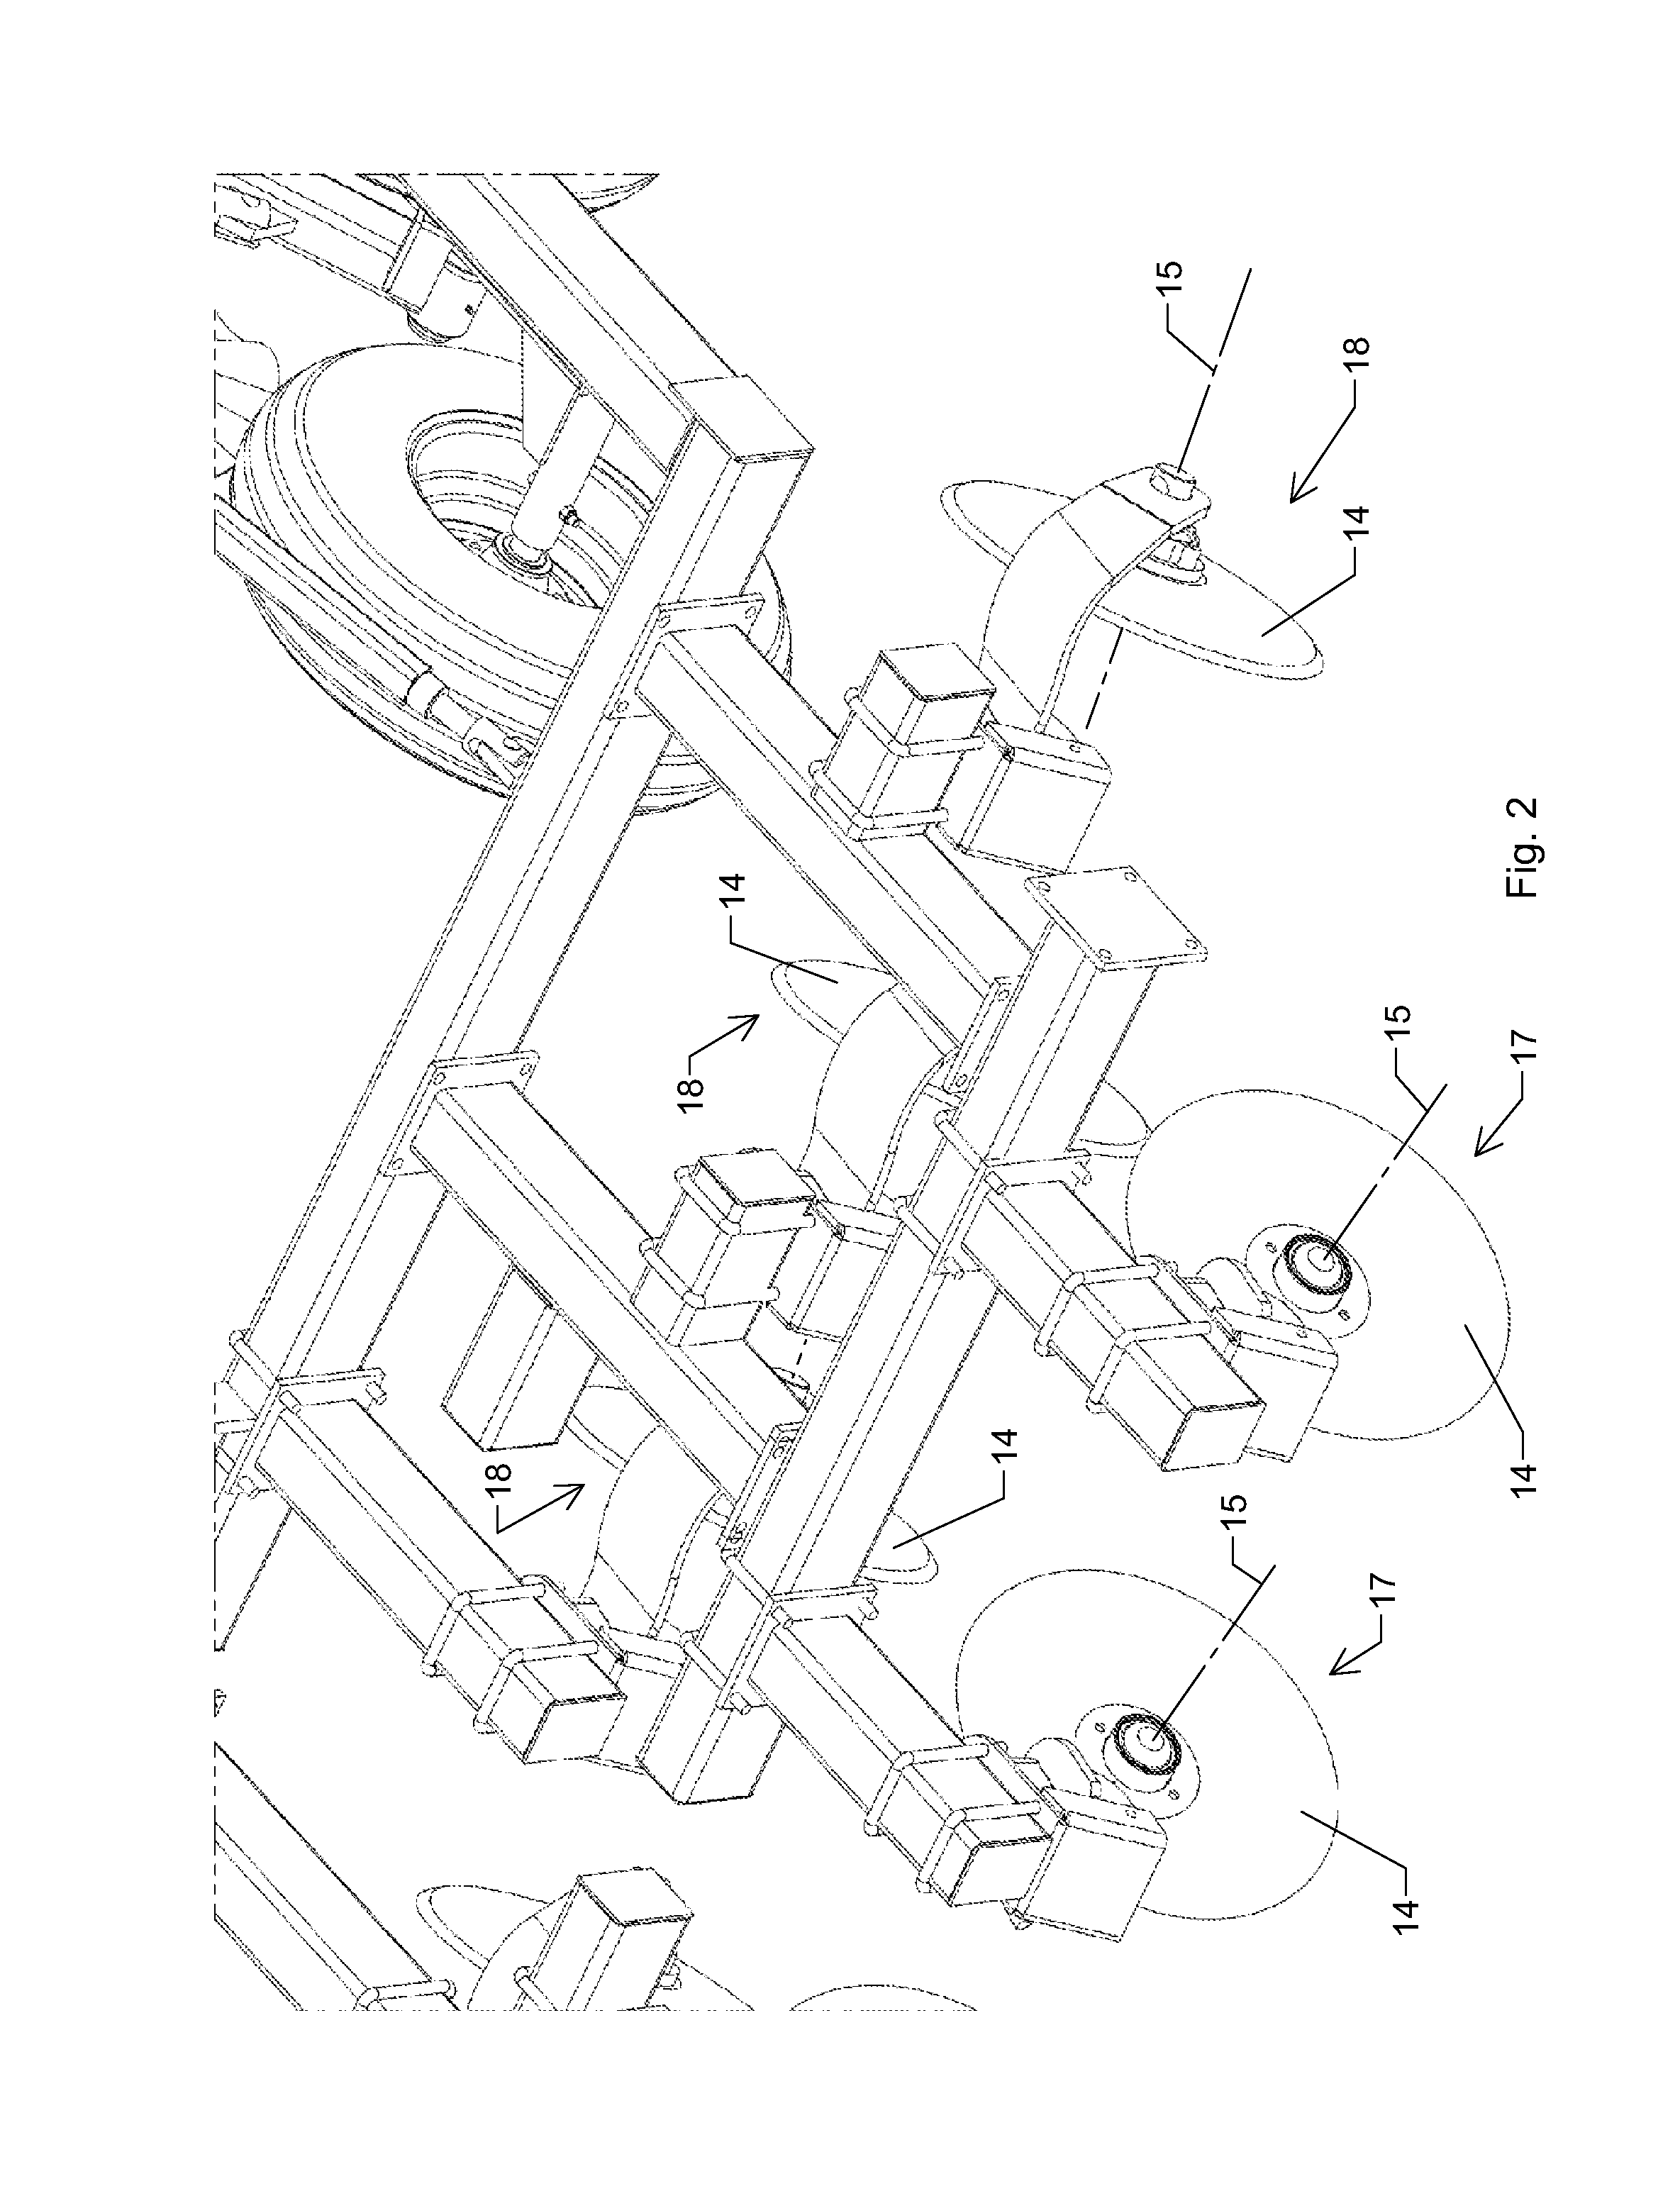 Resiliently mounted agricultural tool and implement therewith